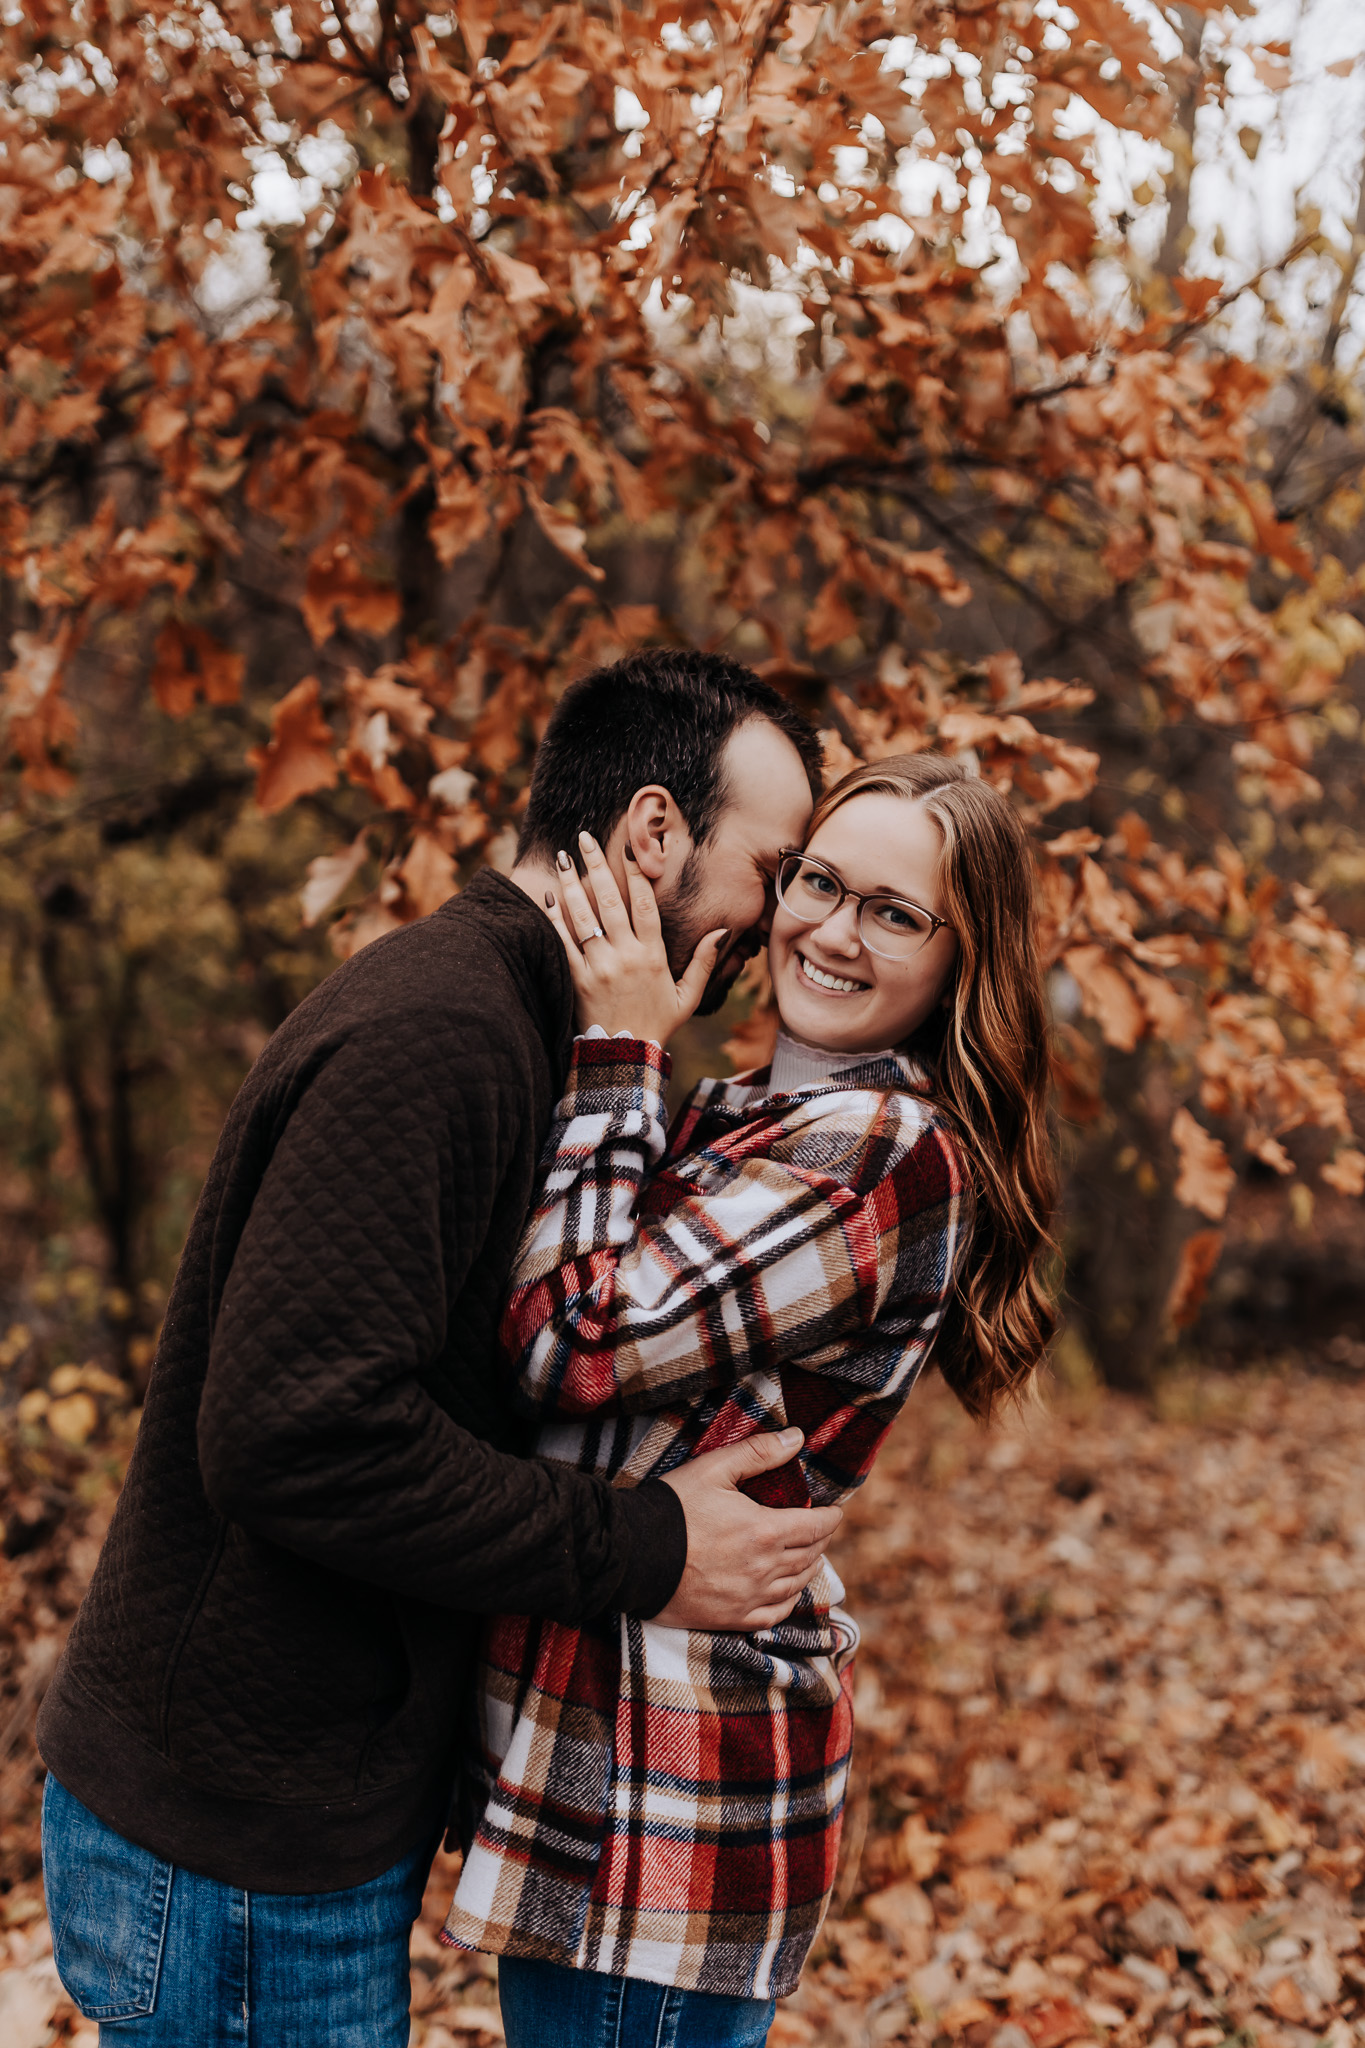 A straight couple's engagement photos. The male is holding his fiance and leaning into the side of her face. She is holding his neck in her hands and smiling at the camera. Minnesota Engagement Photographer.